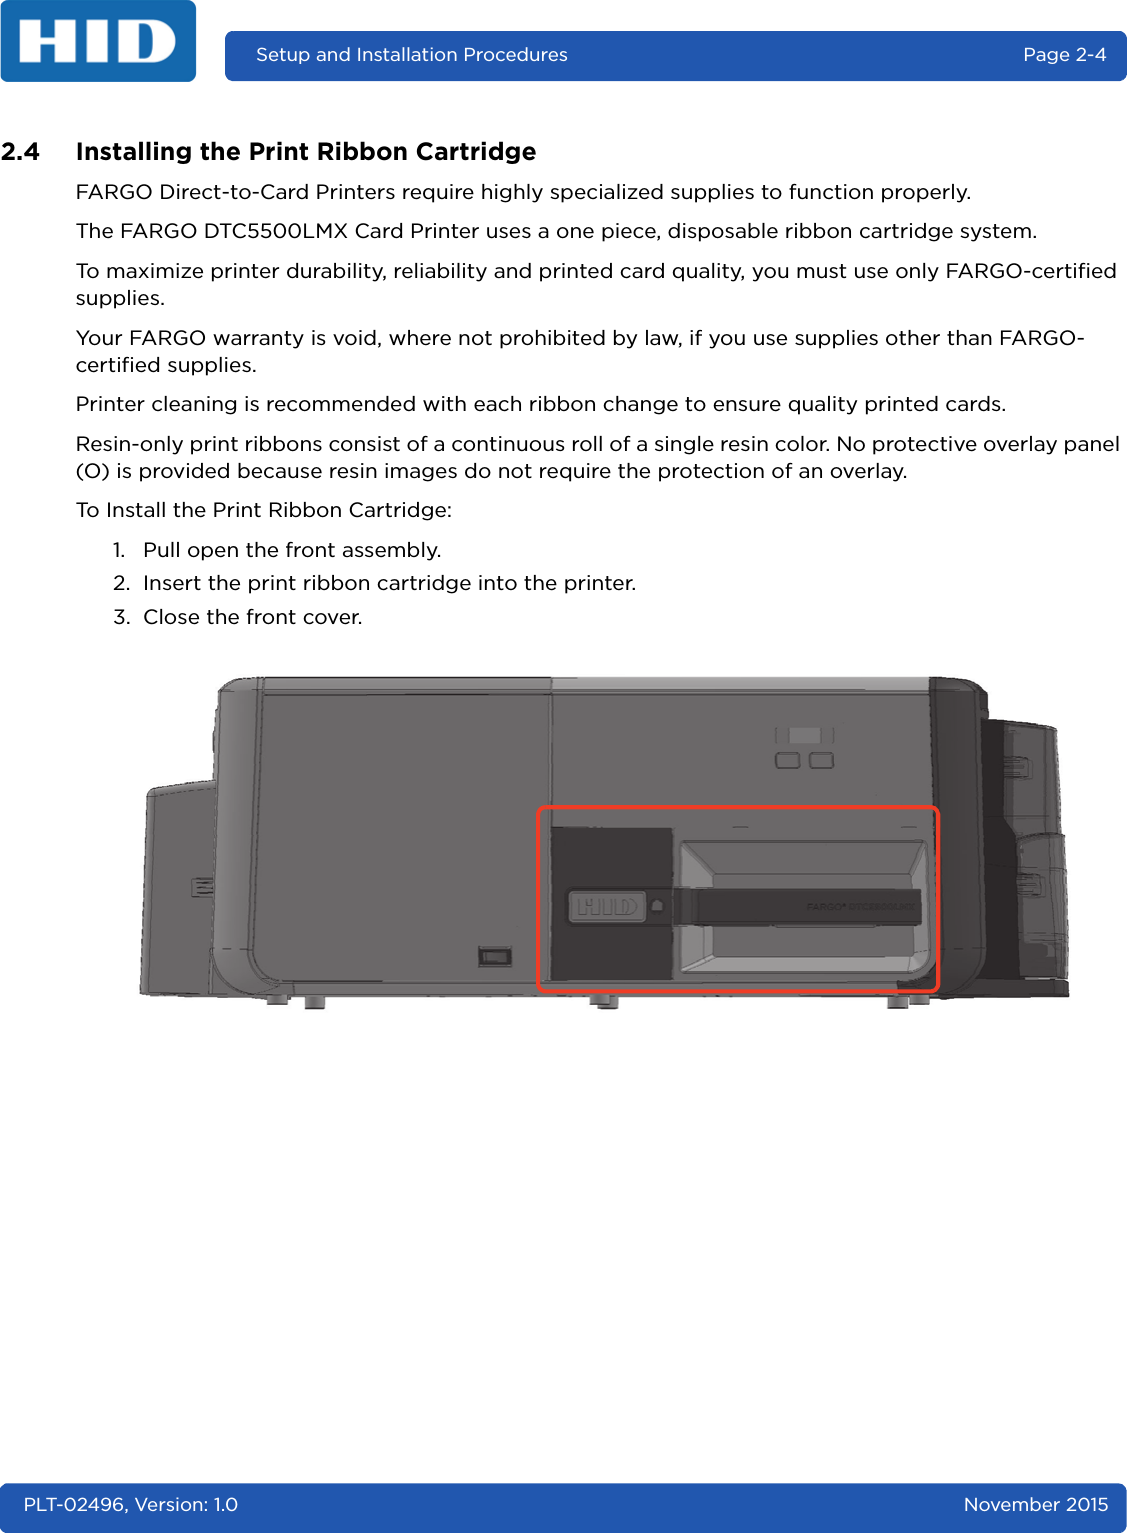 Setup and Installation Procedures  Page 2-4PLT-02496, Version: 1.0 November 20152.4 Installing the Print Ribbon CartridgeFARGO Direct-to-Card Printers require highly specialized supplies to function properly.The FARGO DTC5500LMX Card Printer uses a one piece, disposable ribbon cartridge system.To maximize printer durability, reliability and printed card quality, you must use only FARGO-certified supplies.Your FARGO warranty is void, where not prohibited by law, if you use supplies other than FARGO-certified supplies.Printer cleaning is recommended with each ribbon change to ensure quality printed cards.Resin-only print ribbons consist of a continuous roll of a single resin color. No protective overlay panel (O) is provided because resin images do not require the protection of an overlay.To Install the Print Ribbon Cartridge:1. Pull open the front assembly.2. Insert the print ribbon cartridge into the printer.3. Close the front cover.